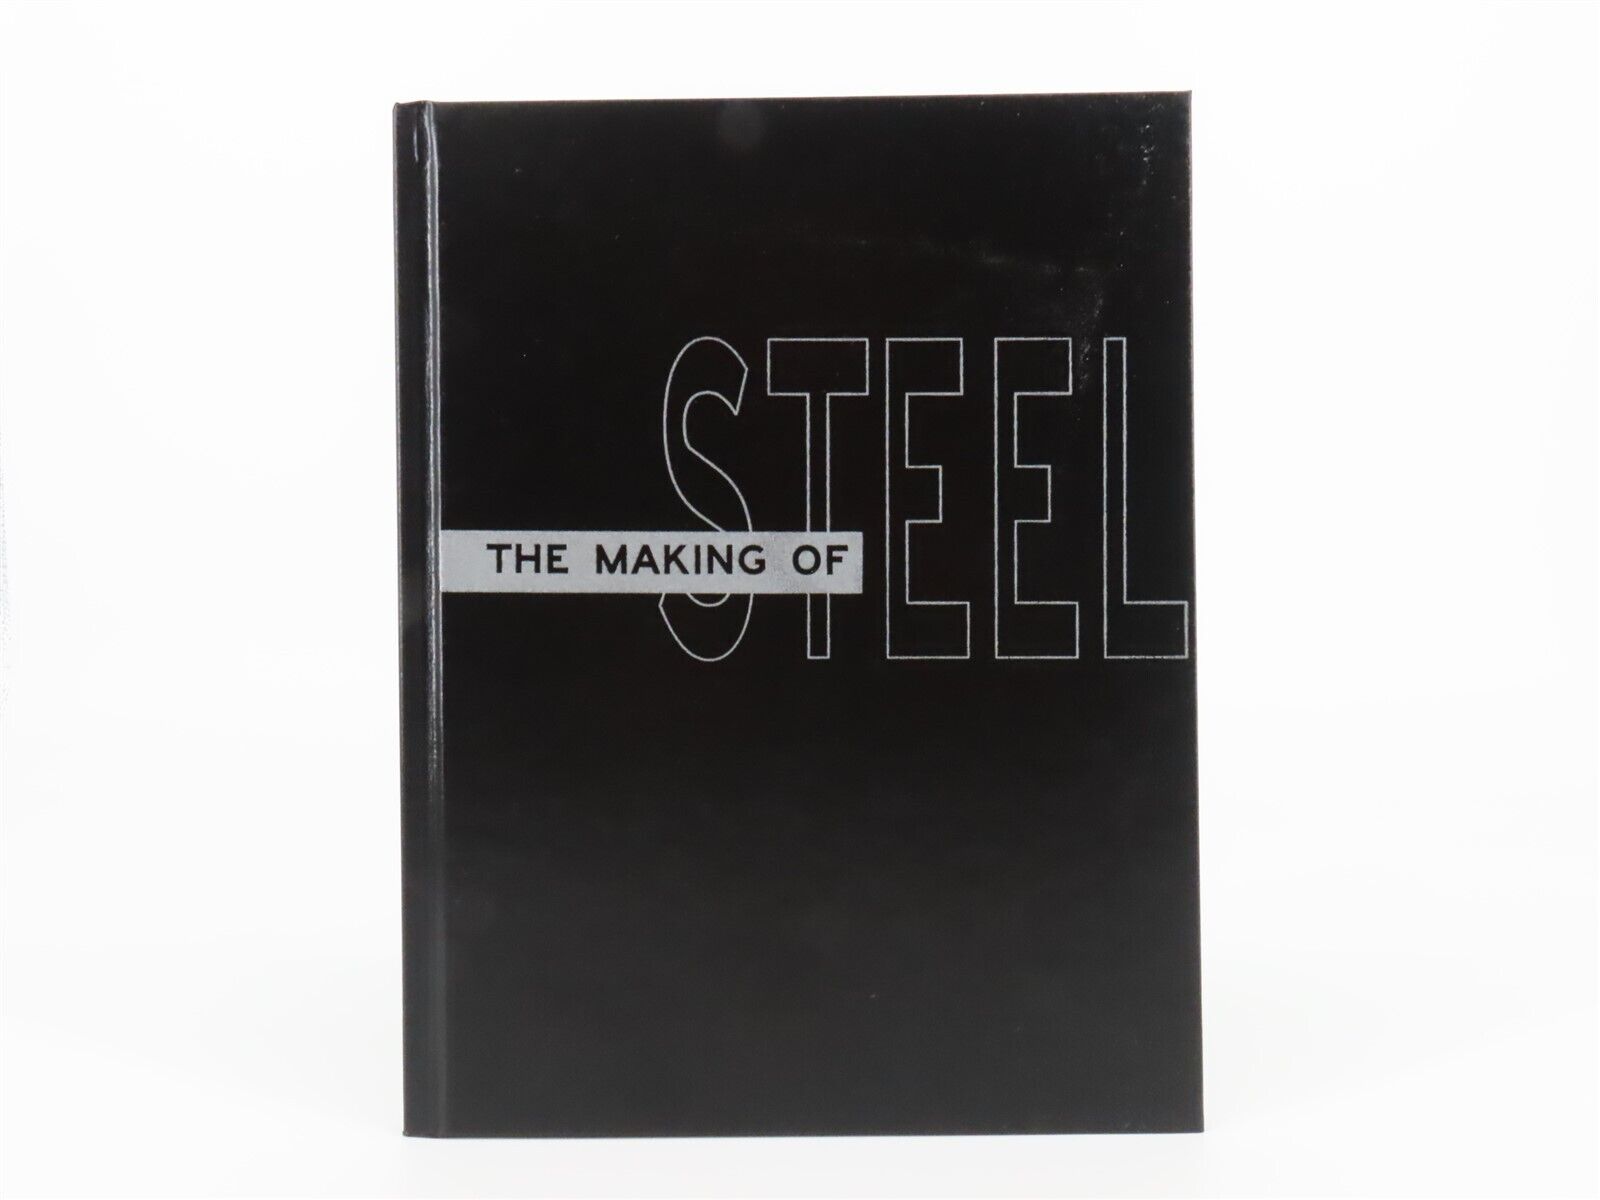 The Making of Steel by American Iron and Steel Institute ©1950 HC Book